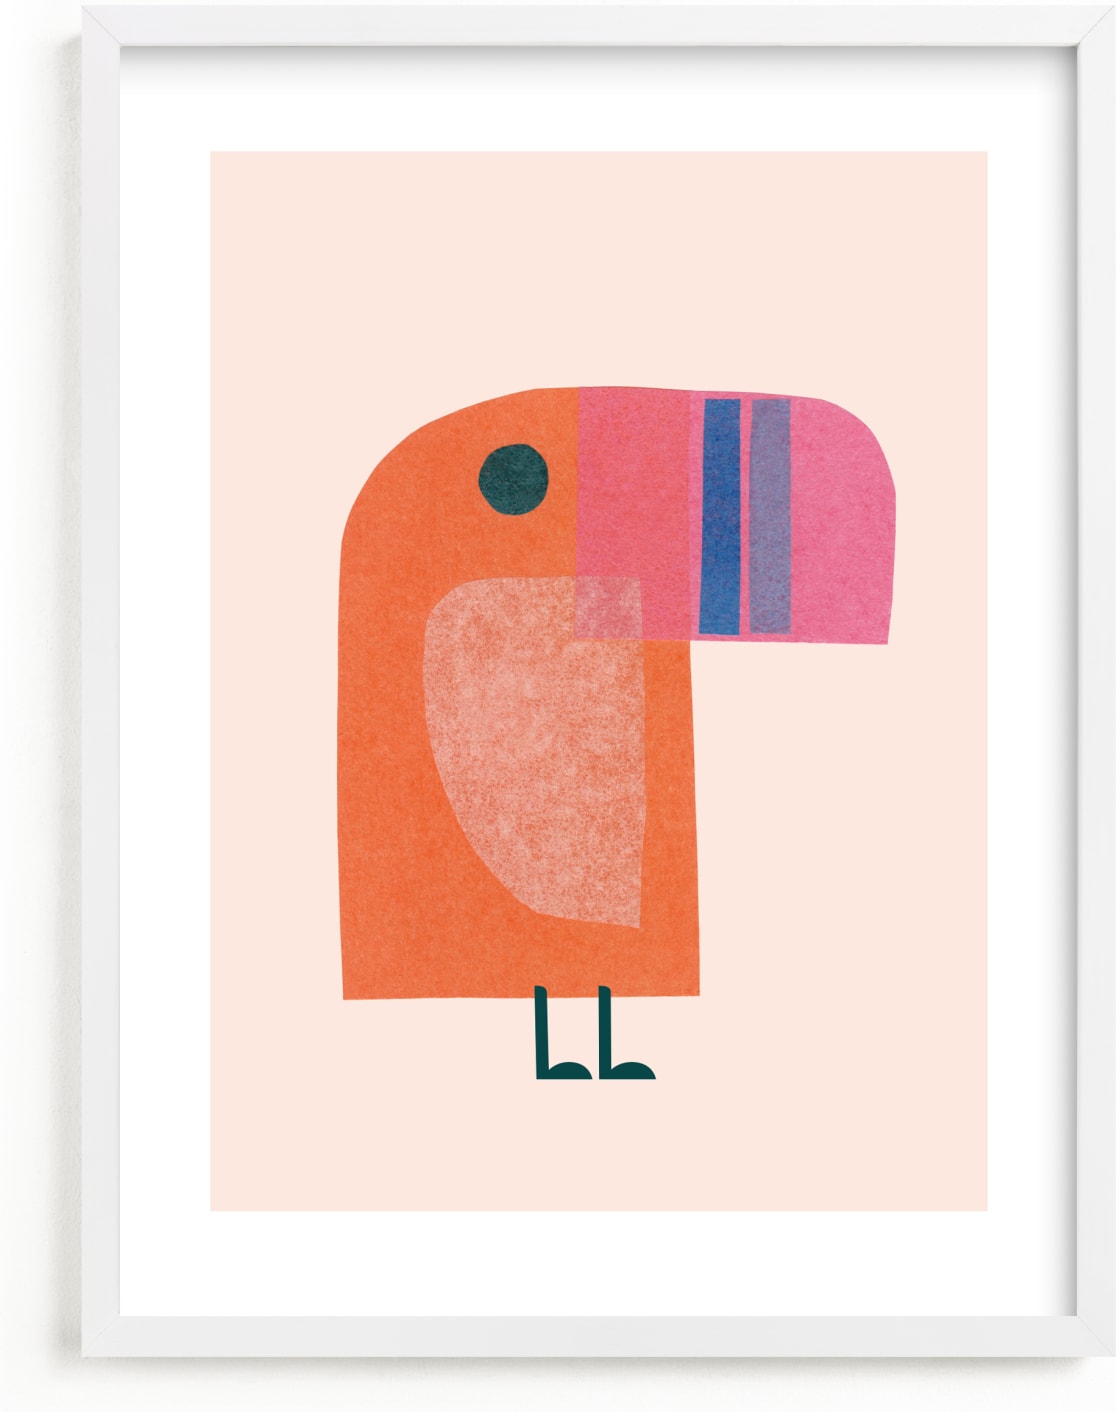 This is a pink art by Carrie Moradi called mod toucan.